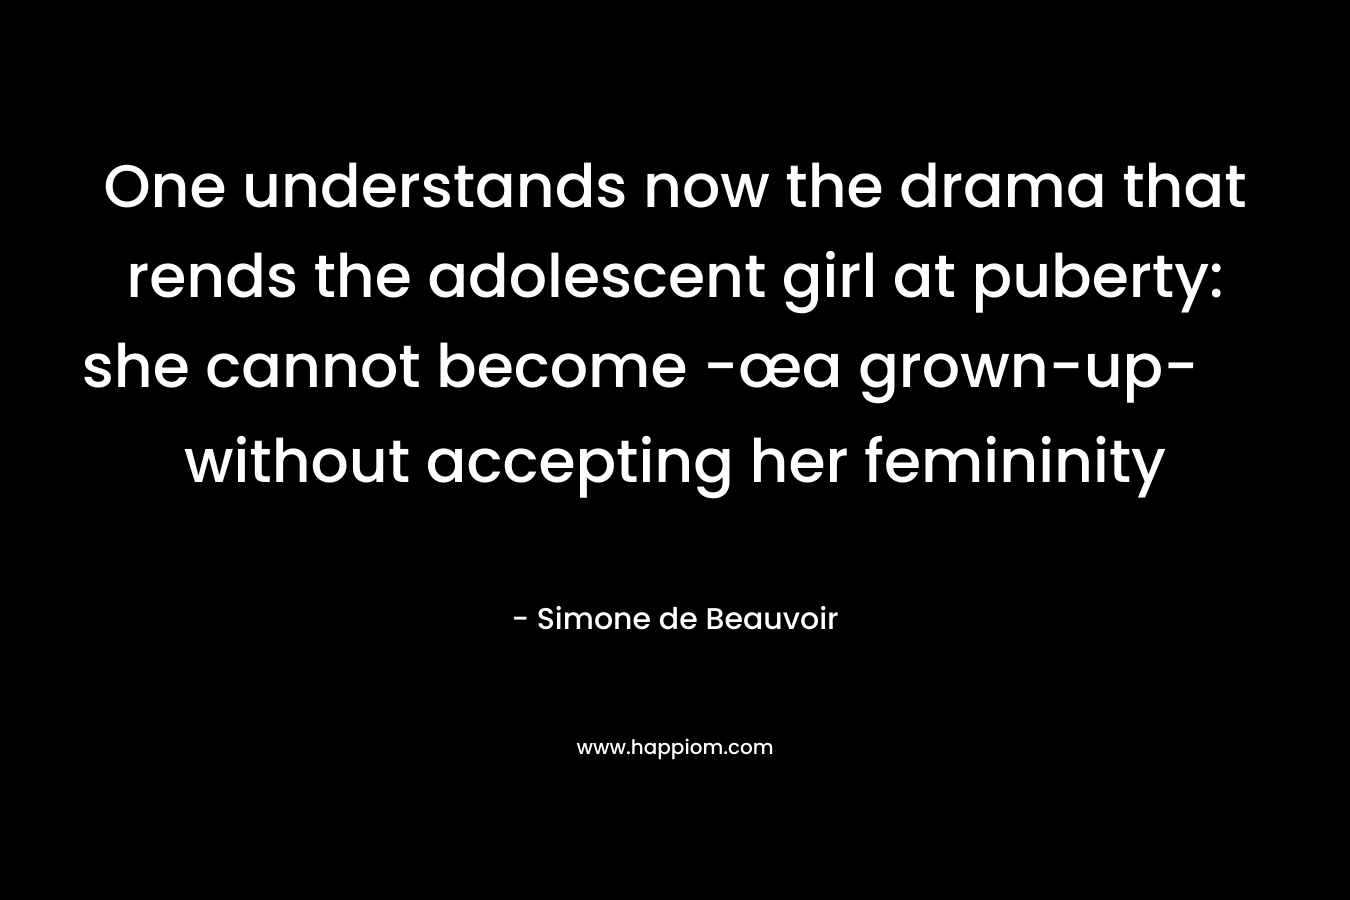 One understands now the drama that rends the adolescent girl at puberty: she cannot become -œa grown-up- without accepting her femininity